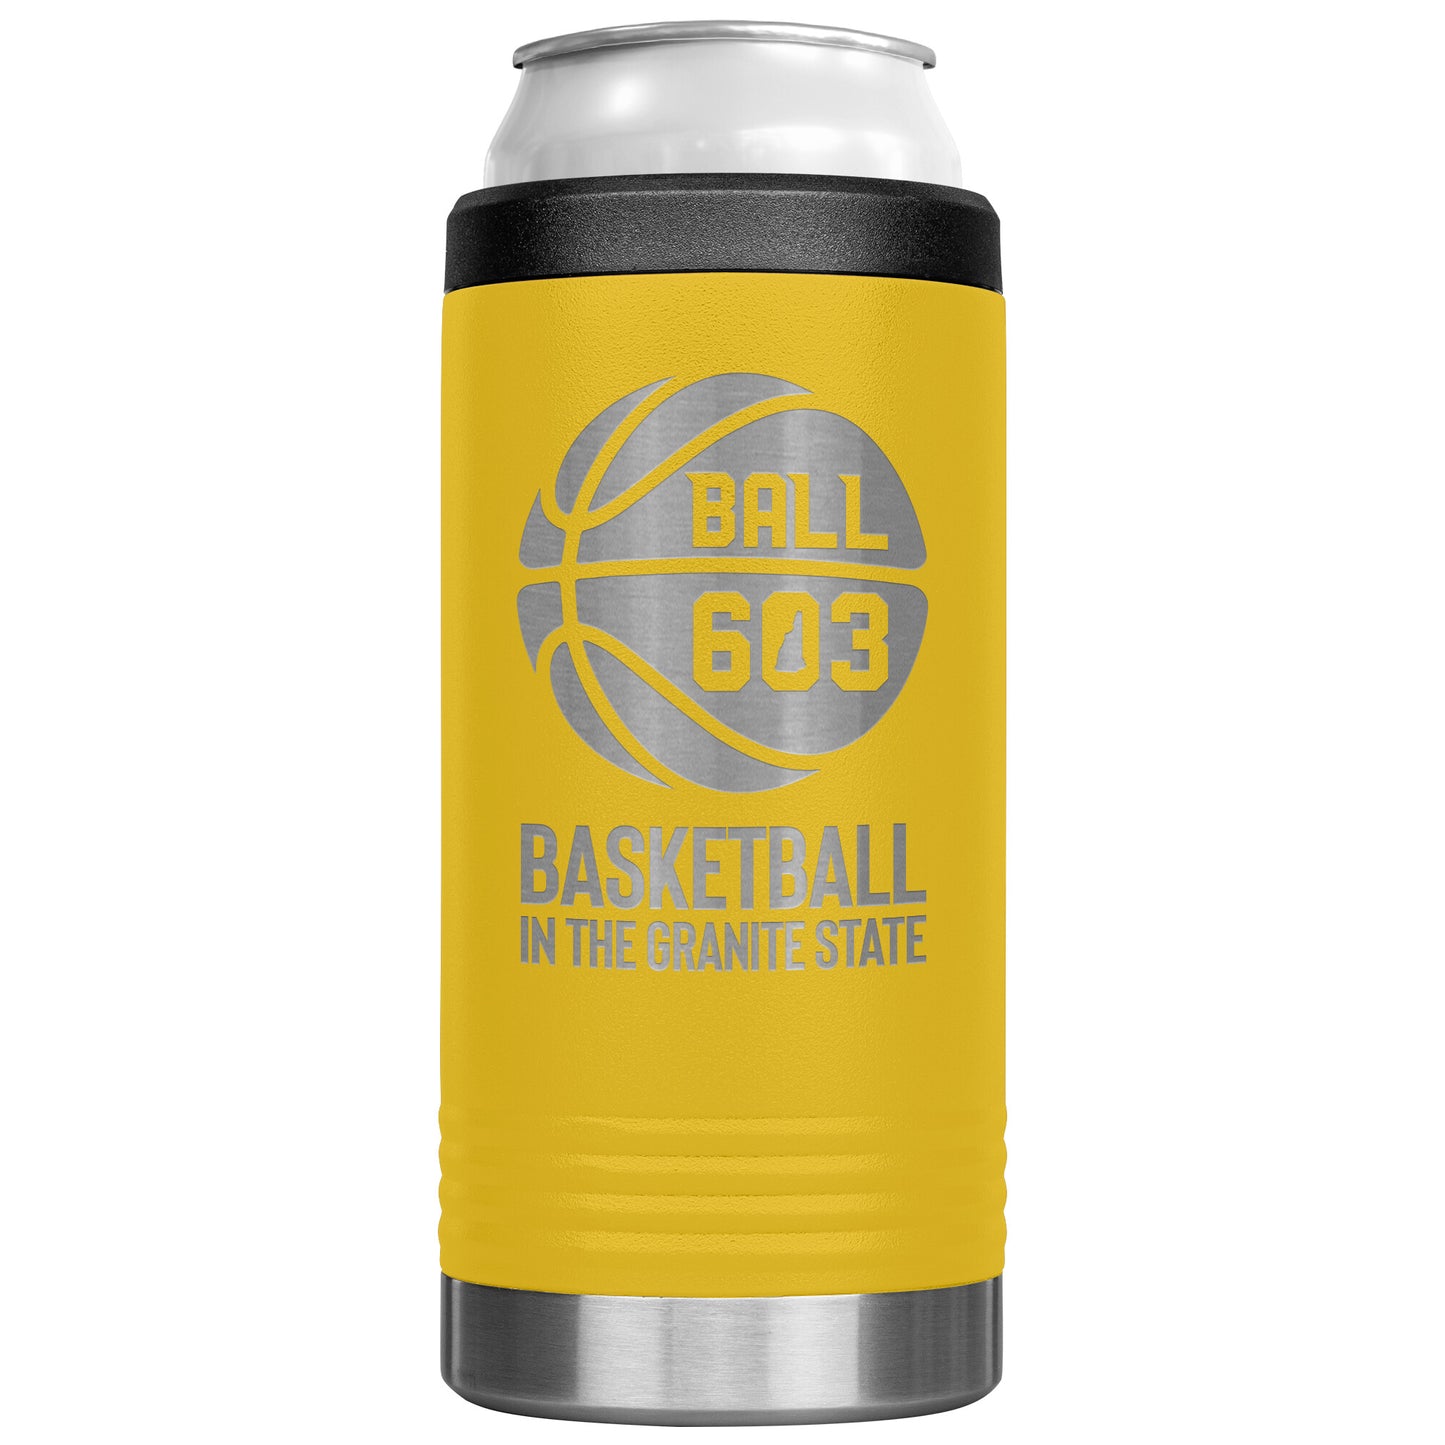 Ball 603 Insulated Koozie (Thin 12oz Can)